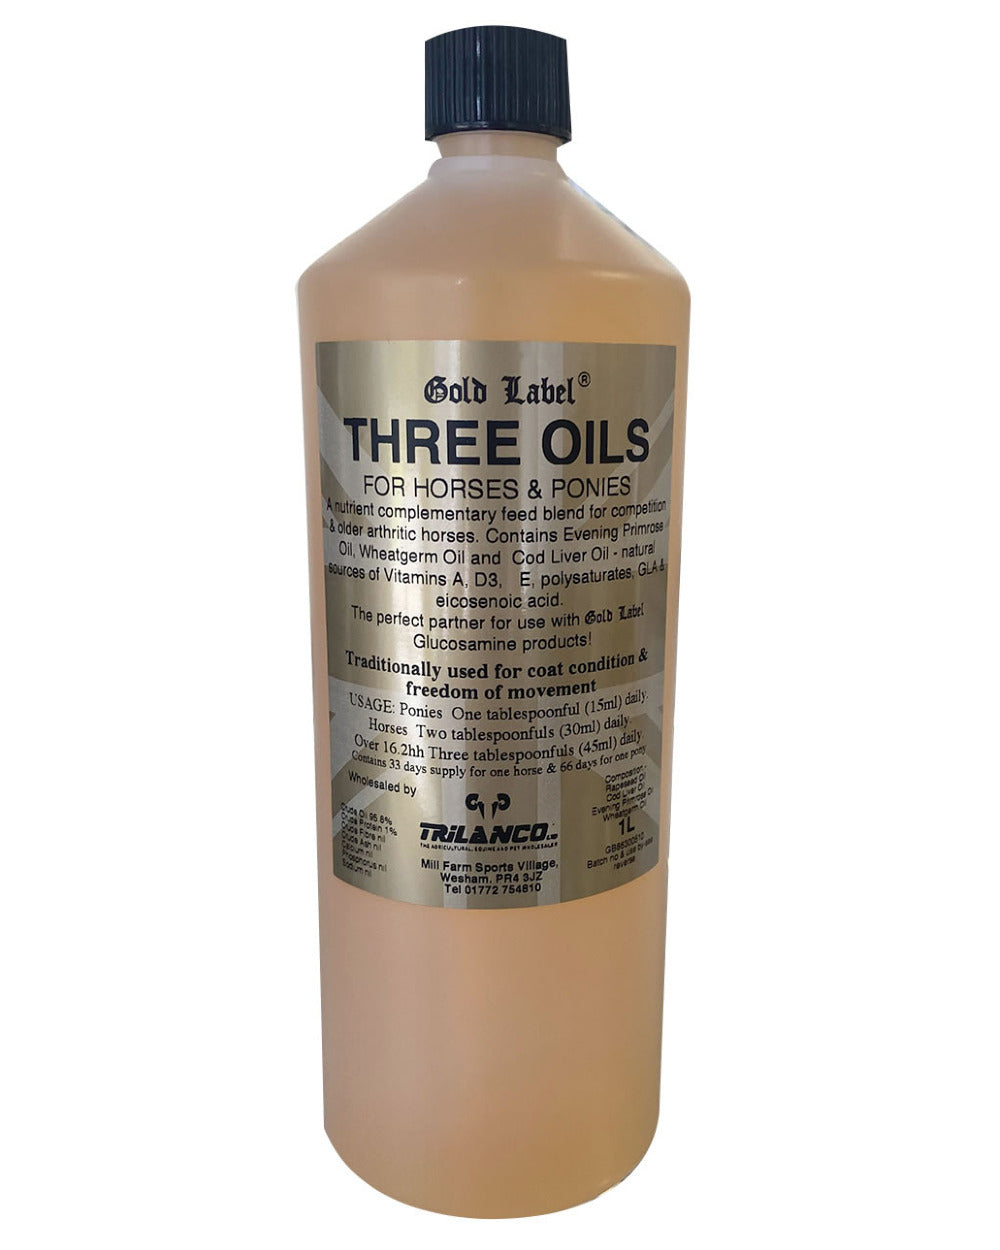 Gold Label Three Oils On A White Background